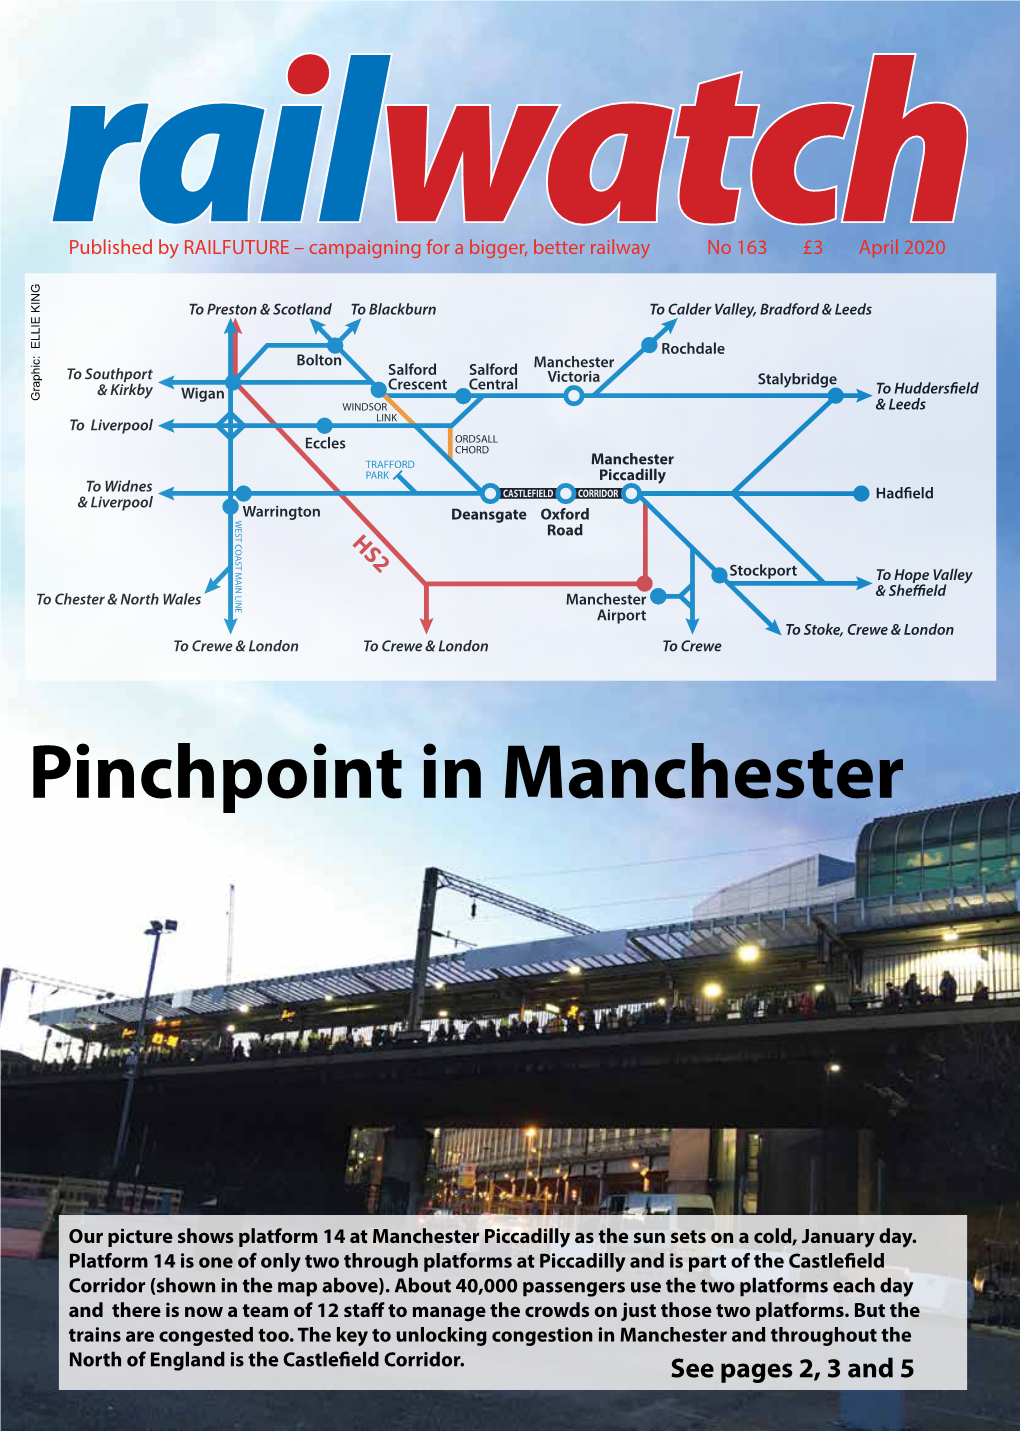 Pinchpoint in Manchester